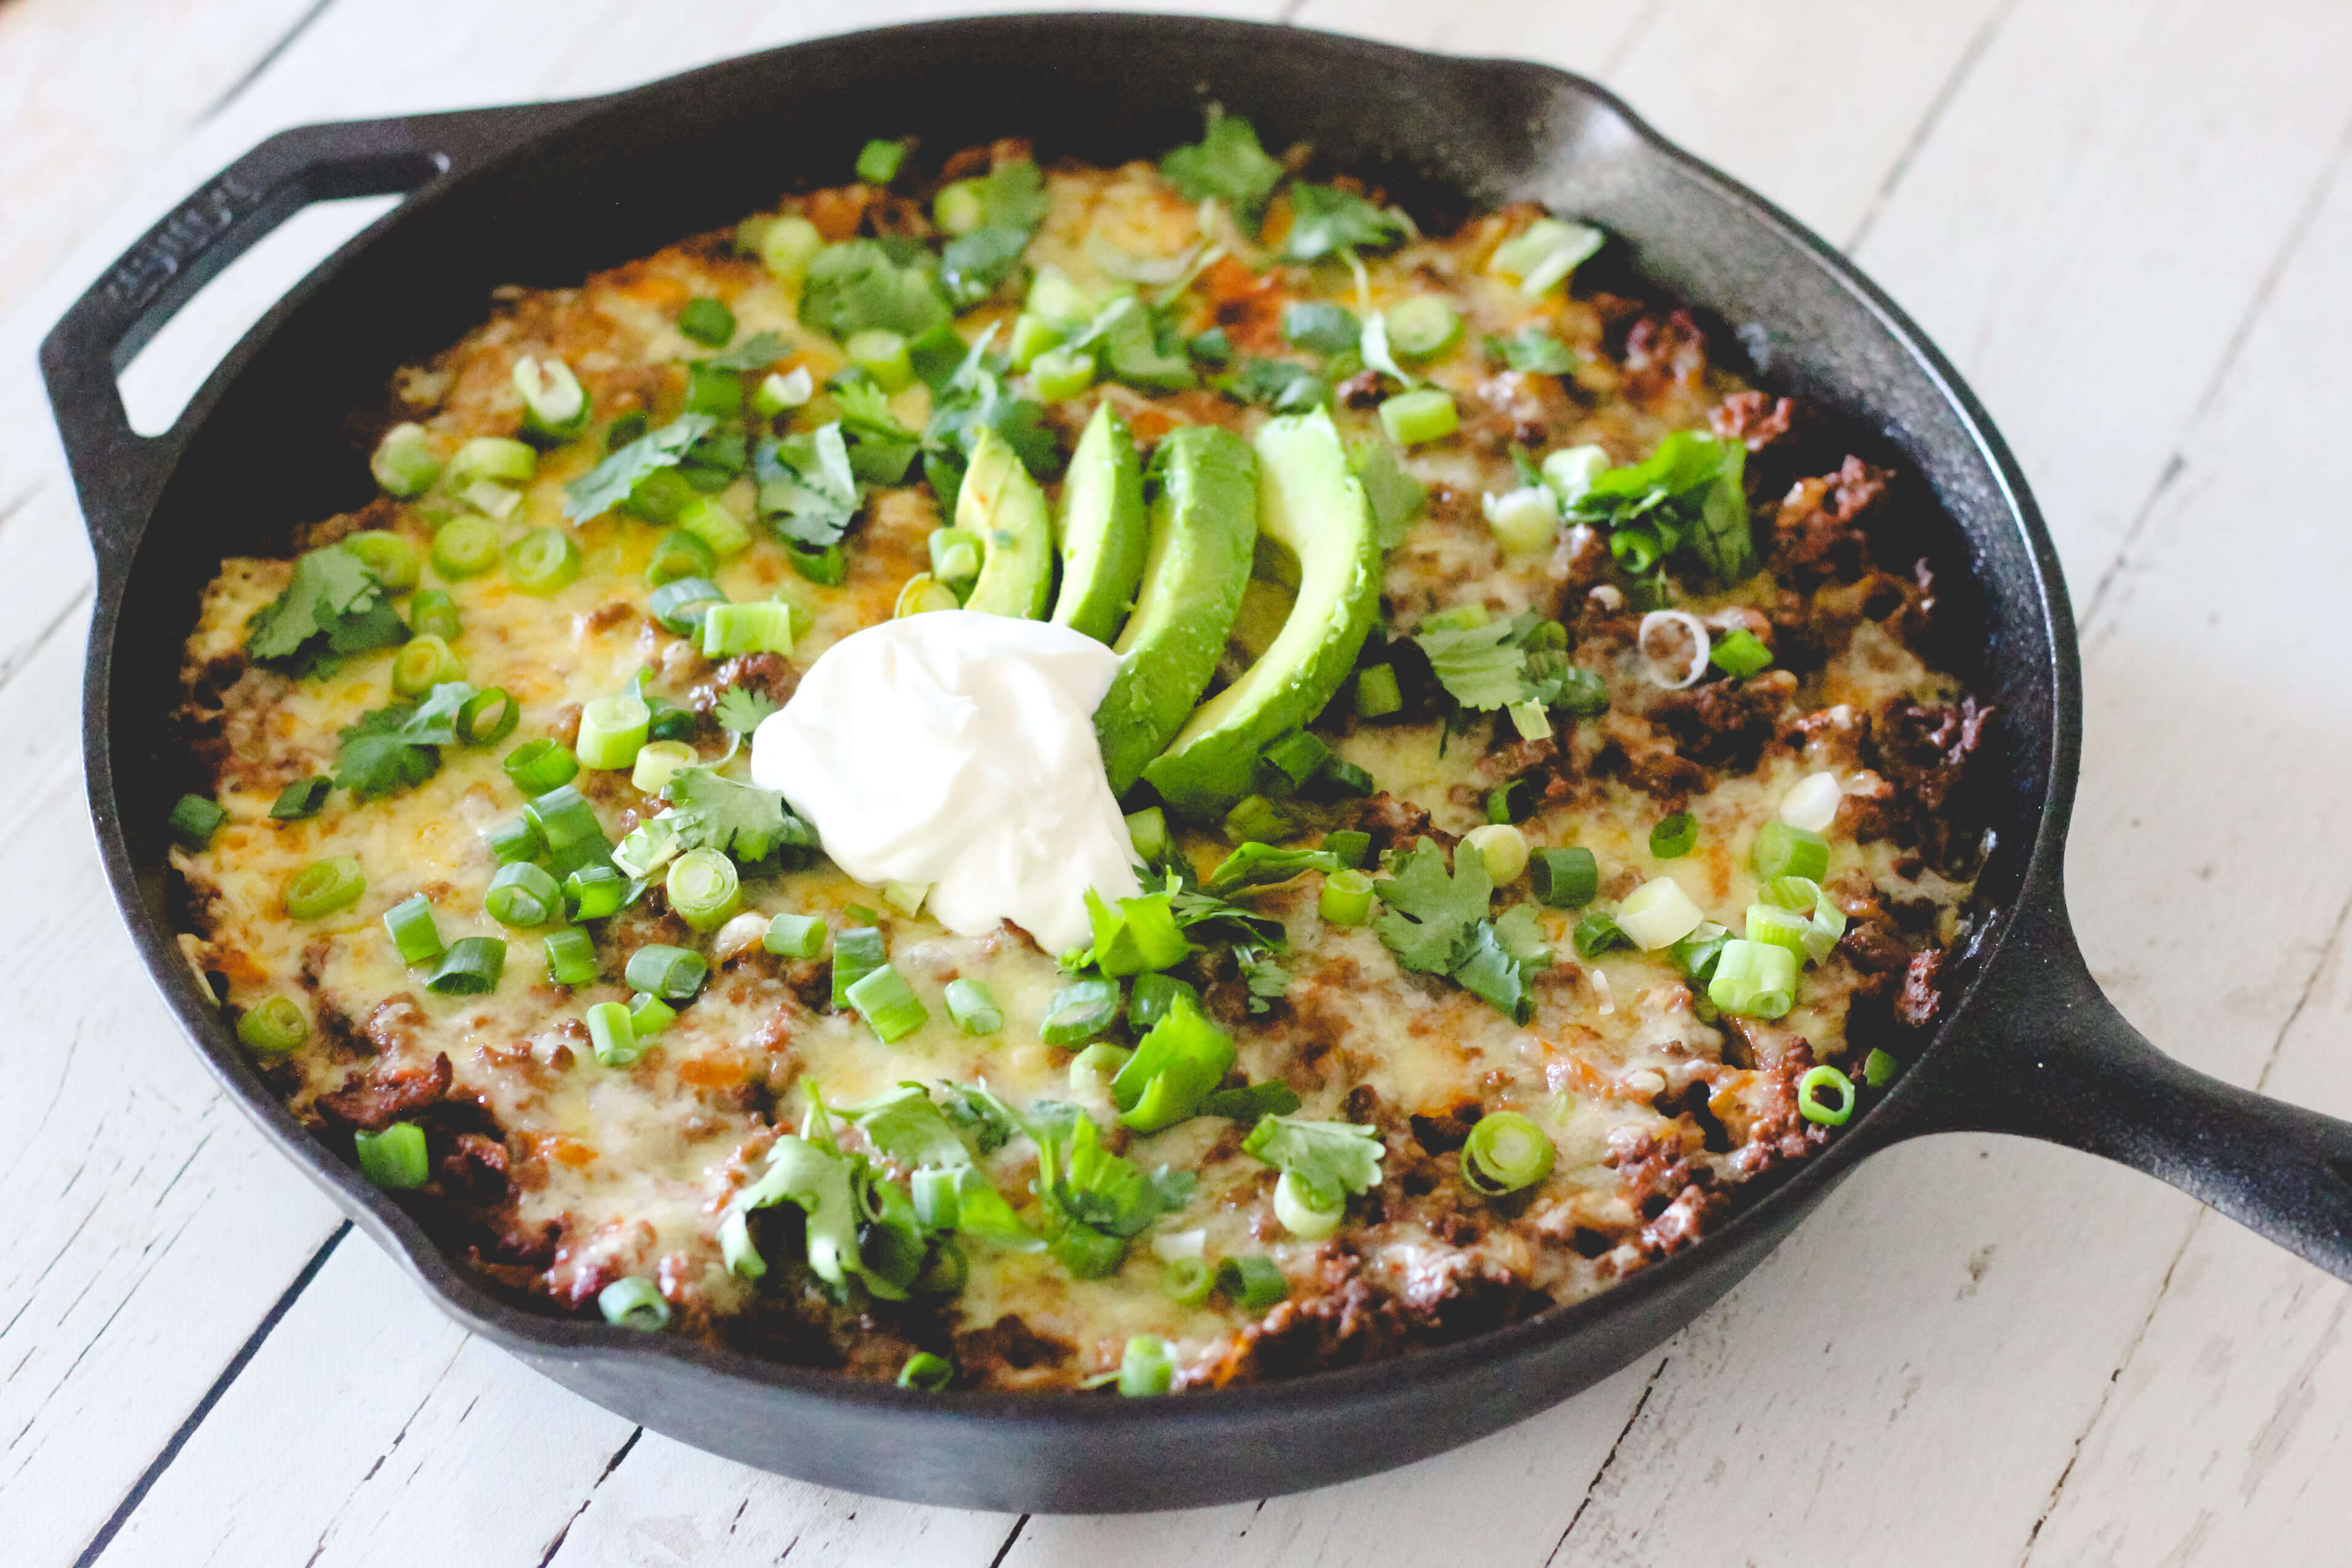 Tamale pie recipe with whole food ingredients.